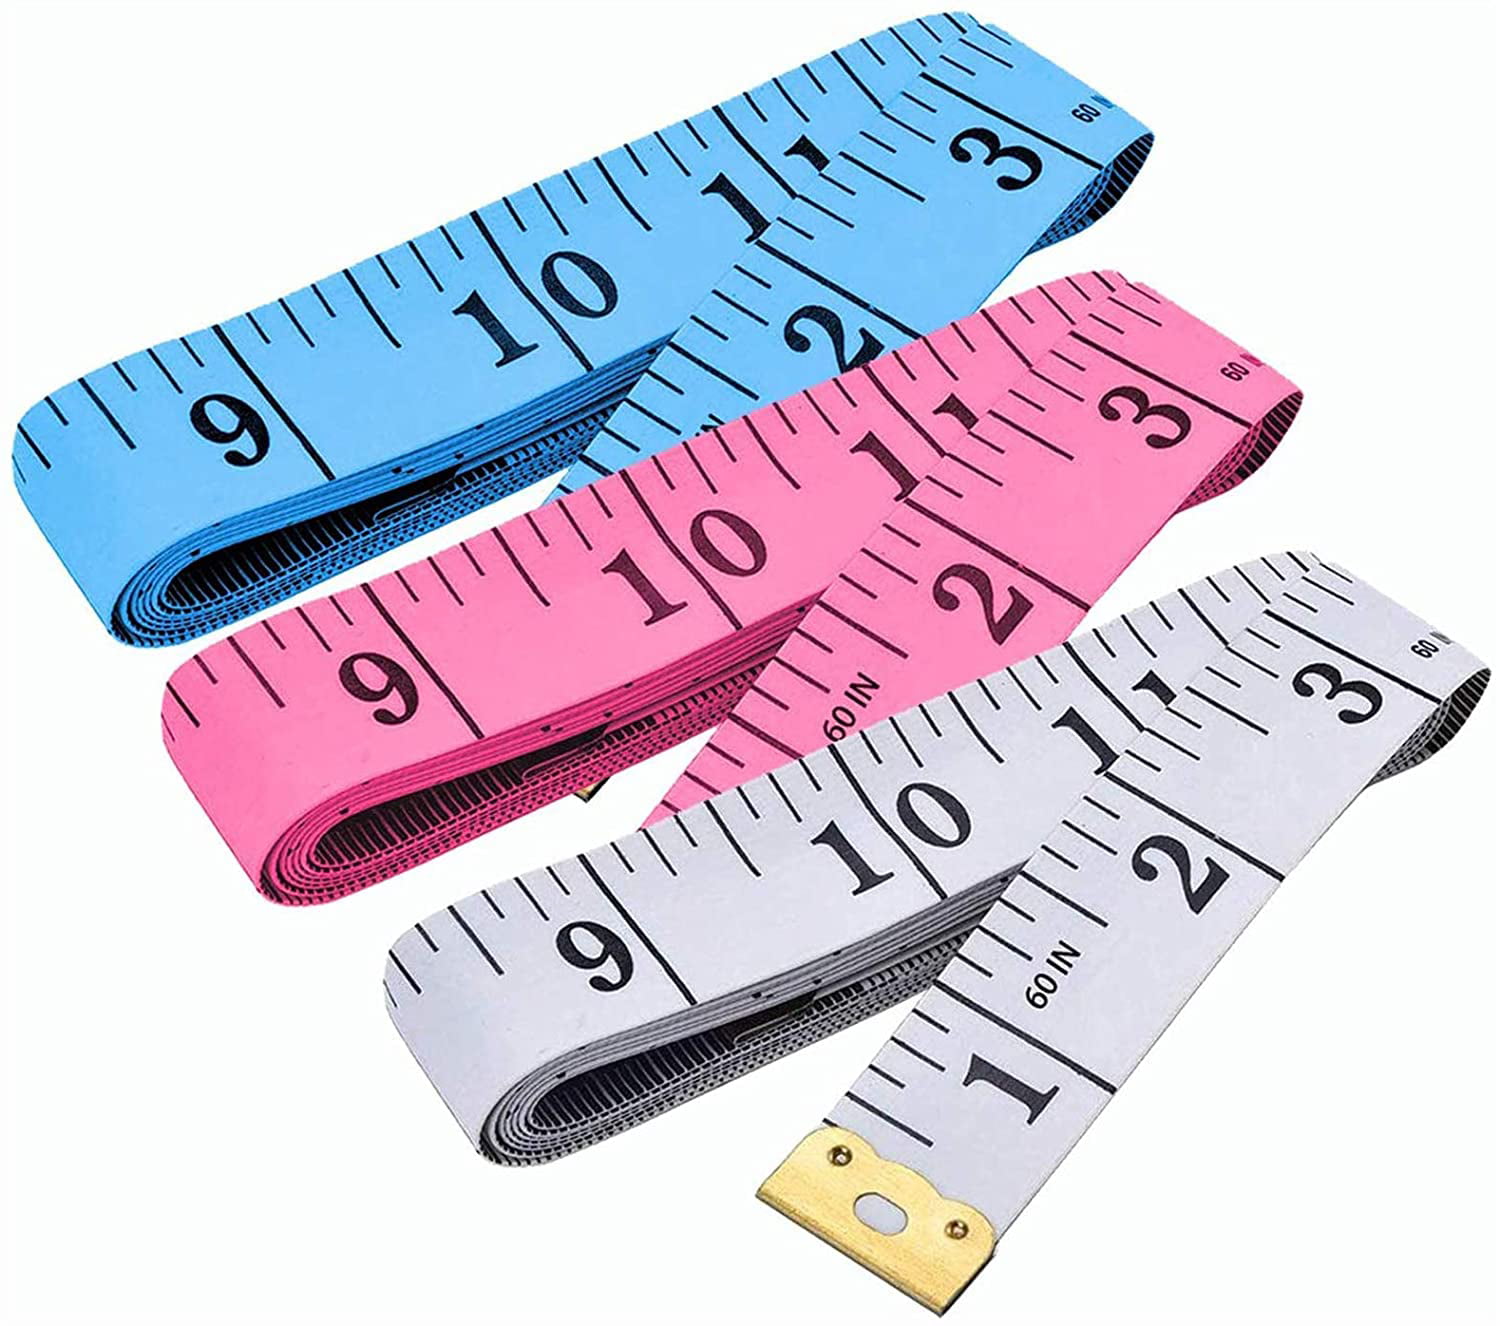 Details about   Body Measuring Tape Ruler Sewing Cloth Tailor Measure Soft 60 cm Flat inch Z9J4 